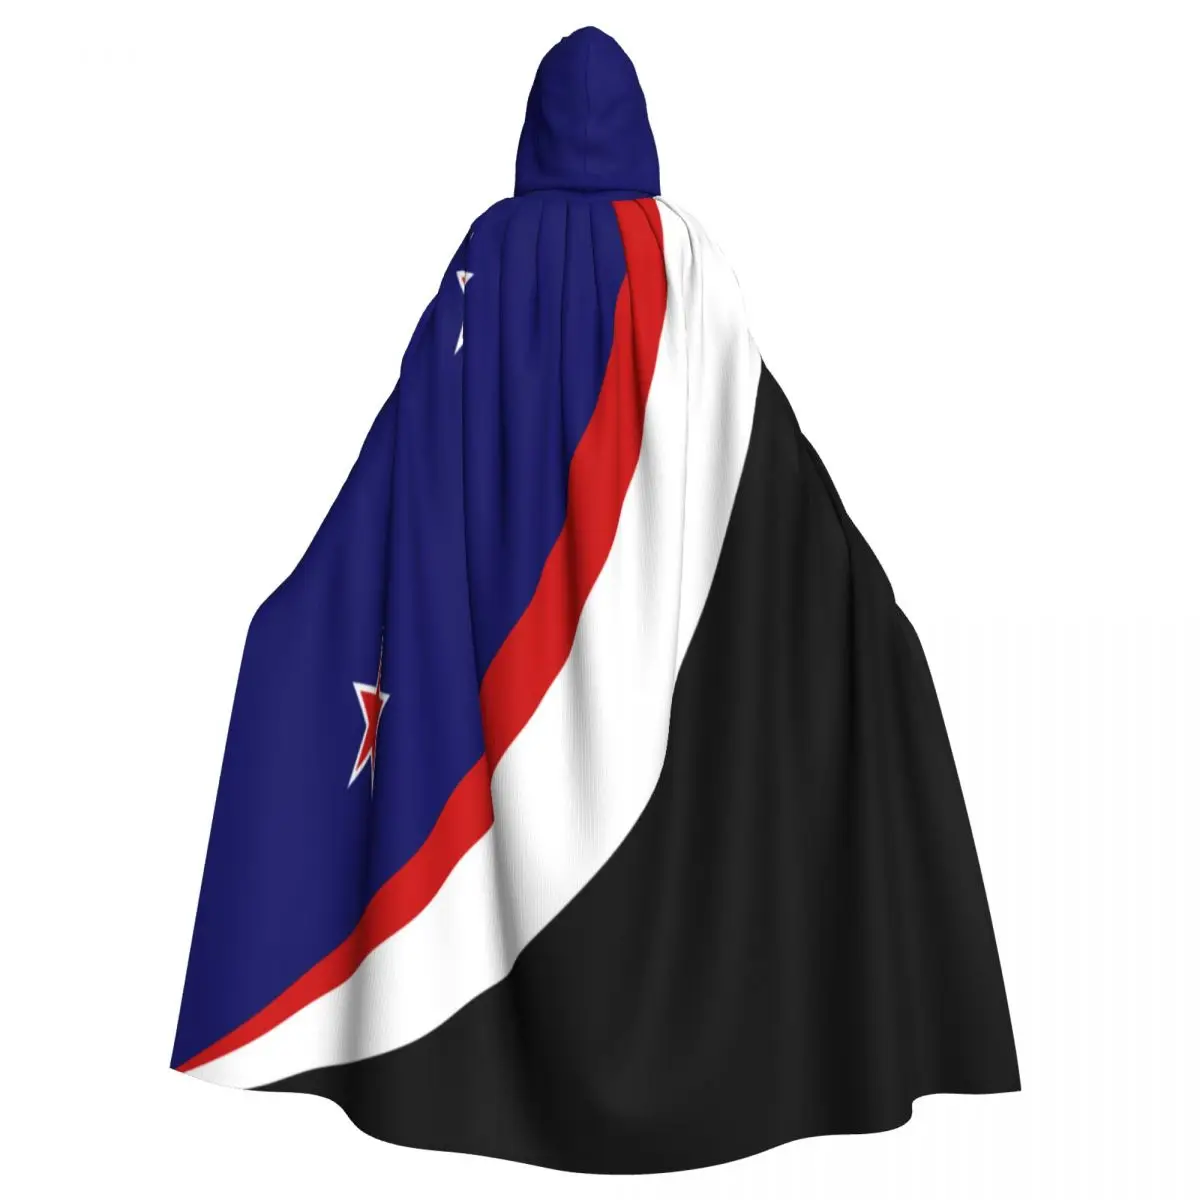 Unisex Witch Party Reversible Hooded Adult Vampires Cape Cloak New Zealand Flag Land Of The Long White Cloud Traditional Blue